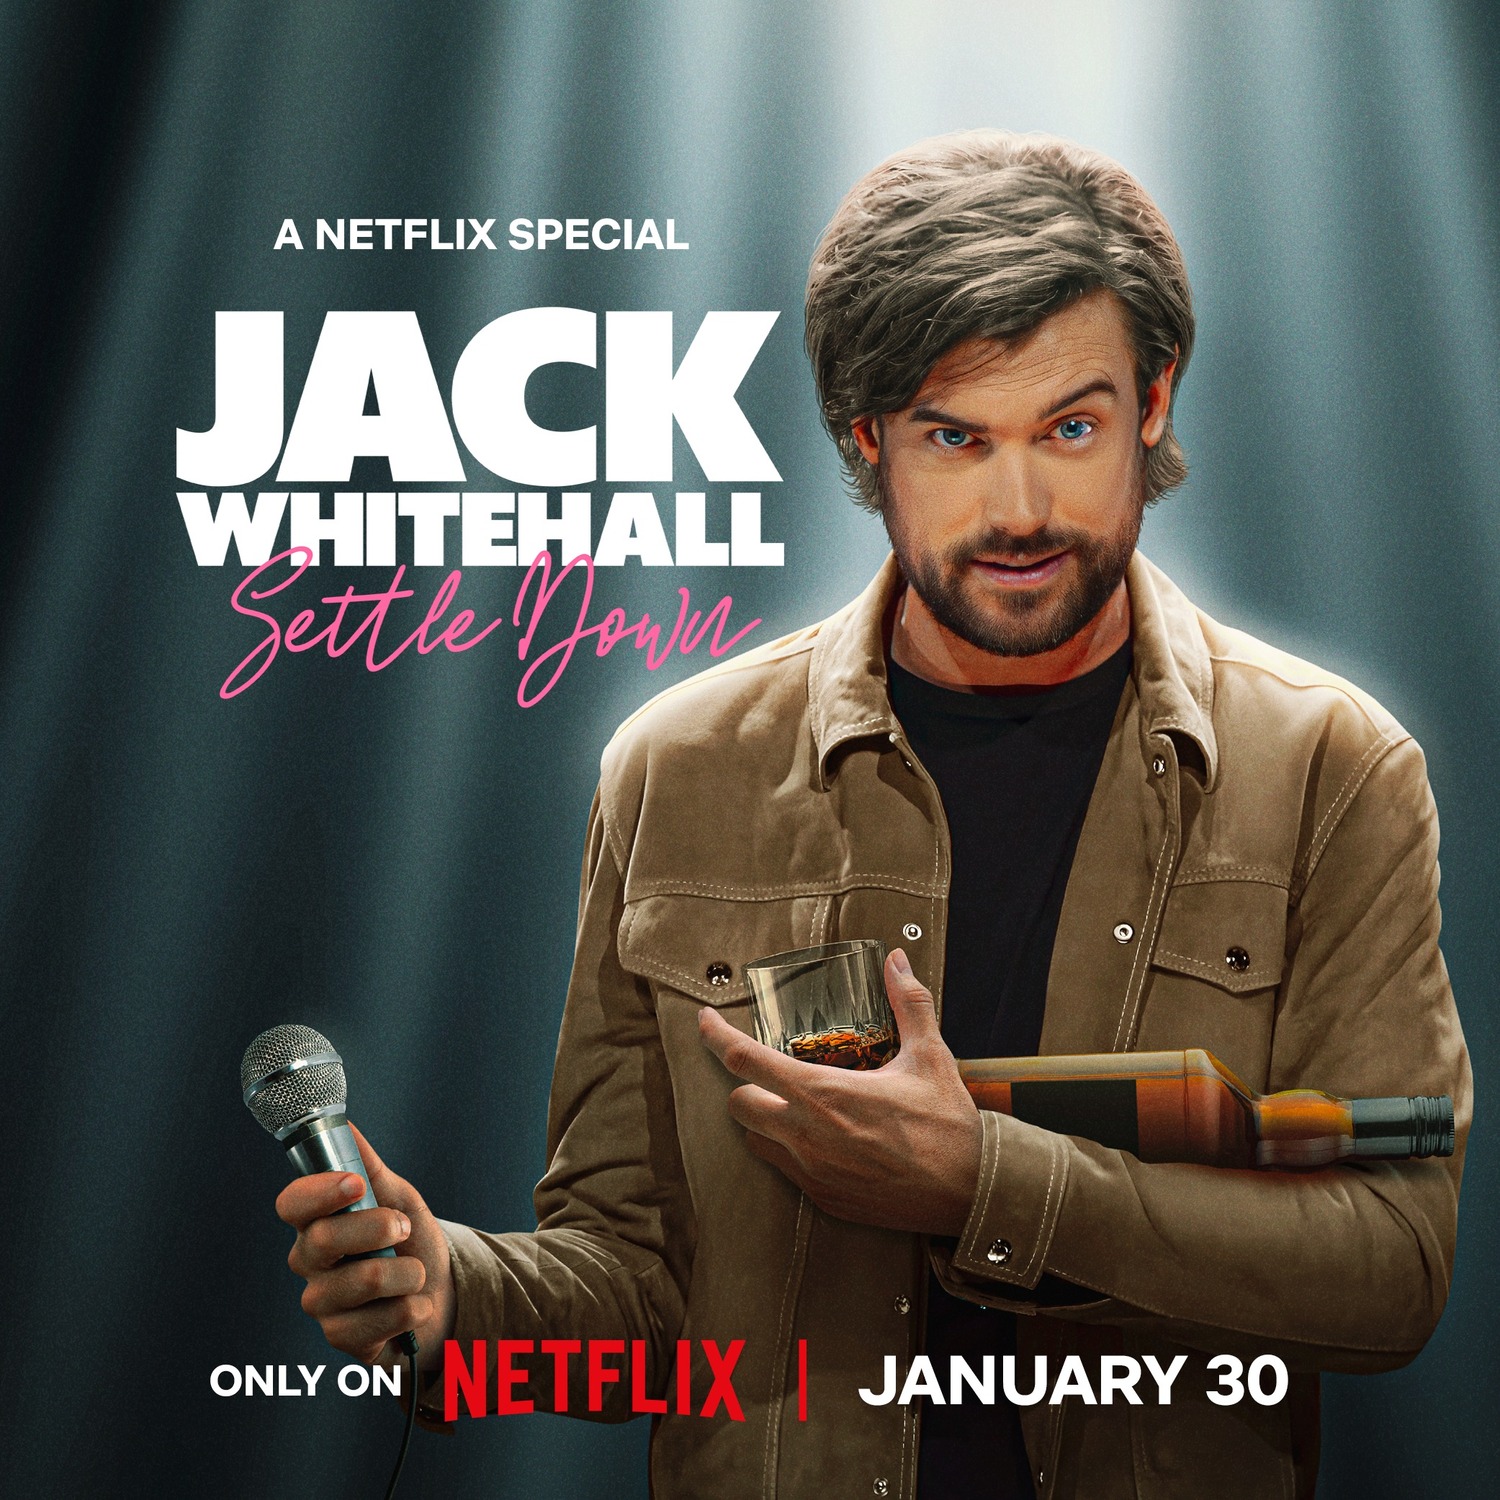 Extra Large Movie Poster Image for Jack Whitehall: Settle Down 